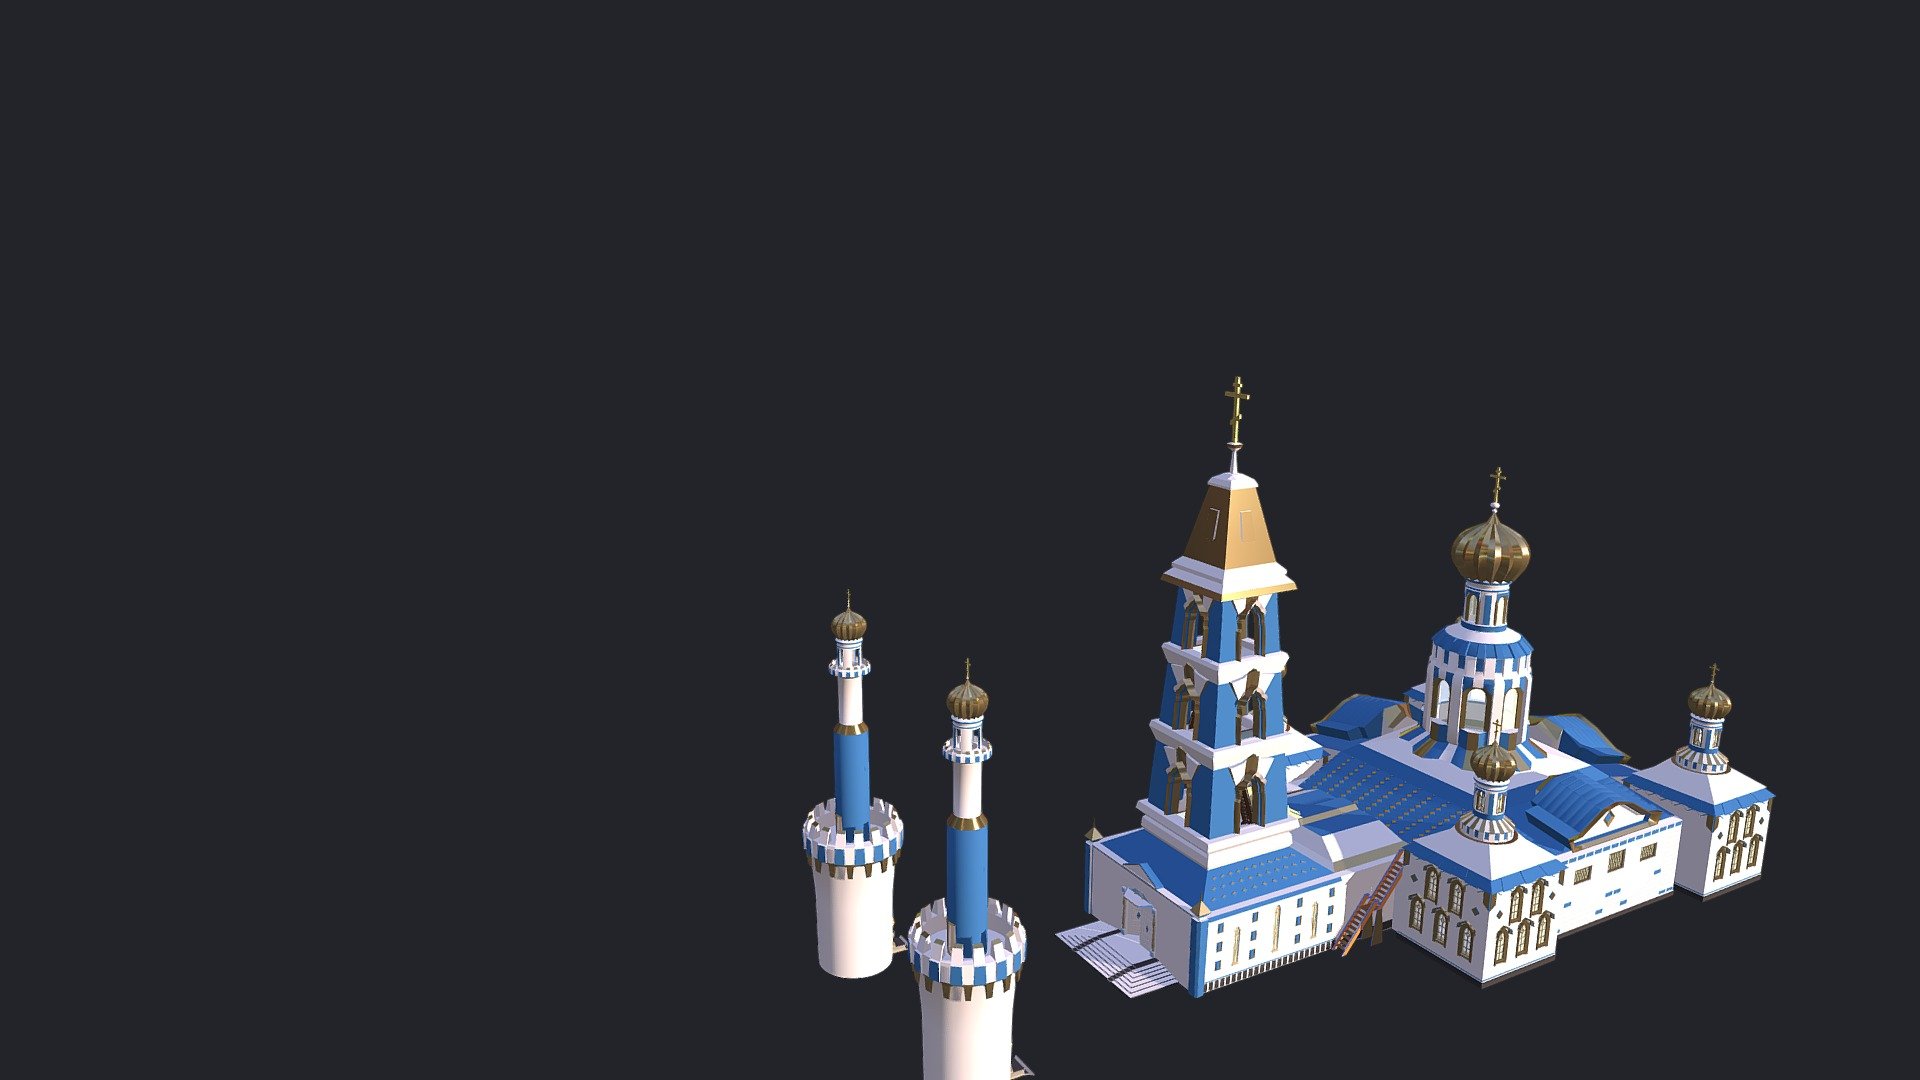 3D model for video games and VR projects.
Made in Blender 3D. Tested in Unity 3D.  LOW POLY. 

If you want to buy my 3D models for your projects, write me directly: ryazanov.vickt@yandex.ru

Most of my 3D models has FBX format and cost from $5 to $20 3d model